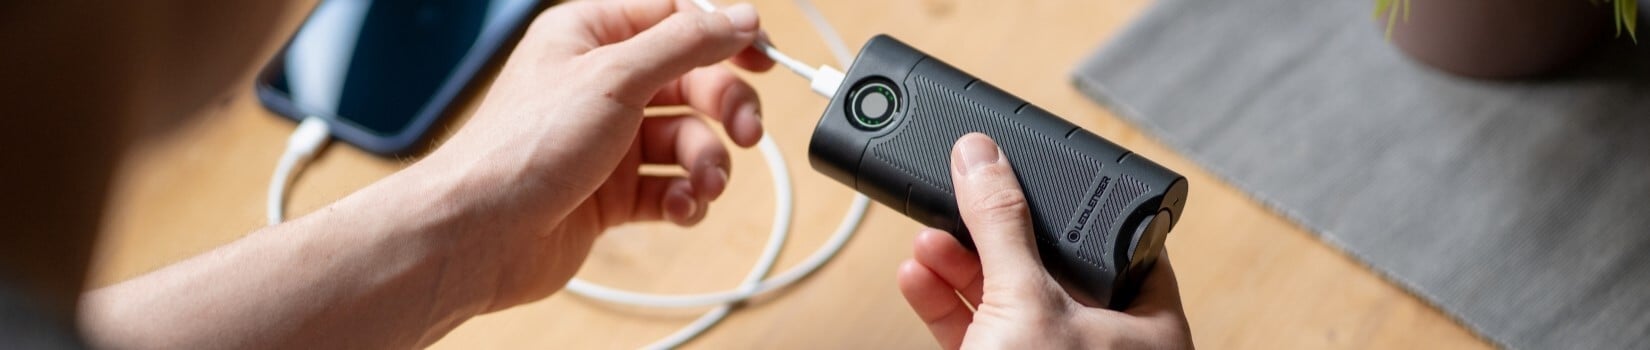 Power bank connected to a smartphone